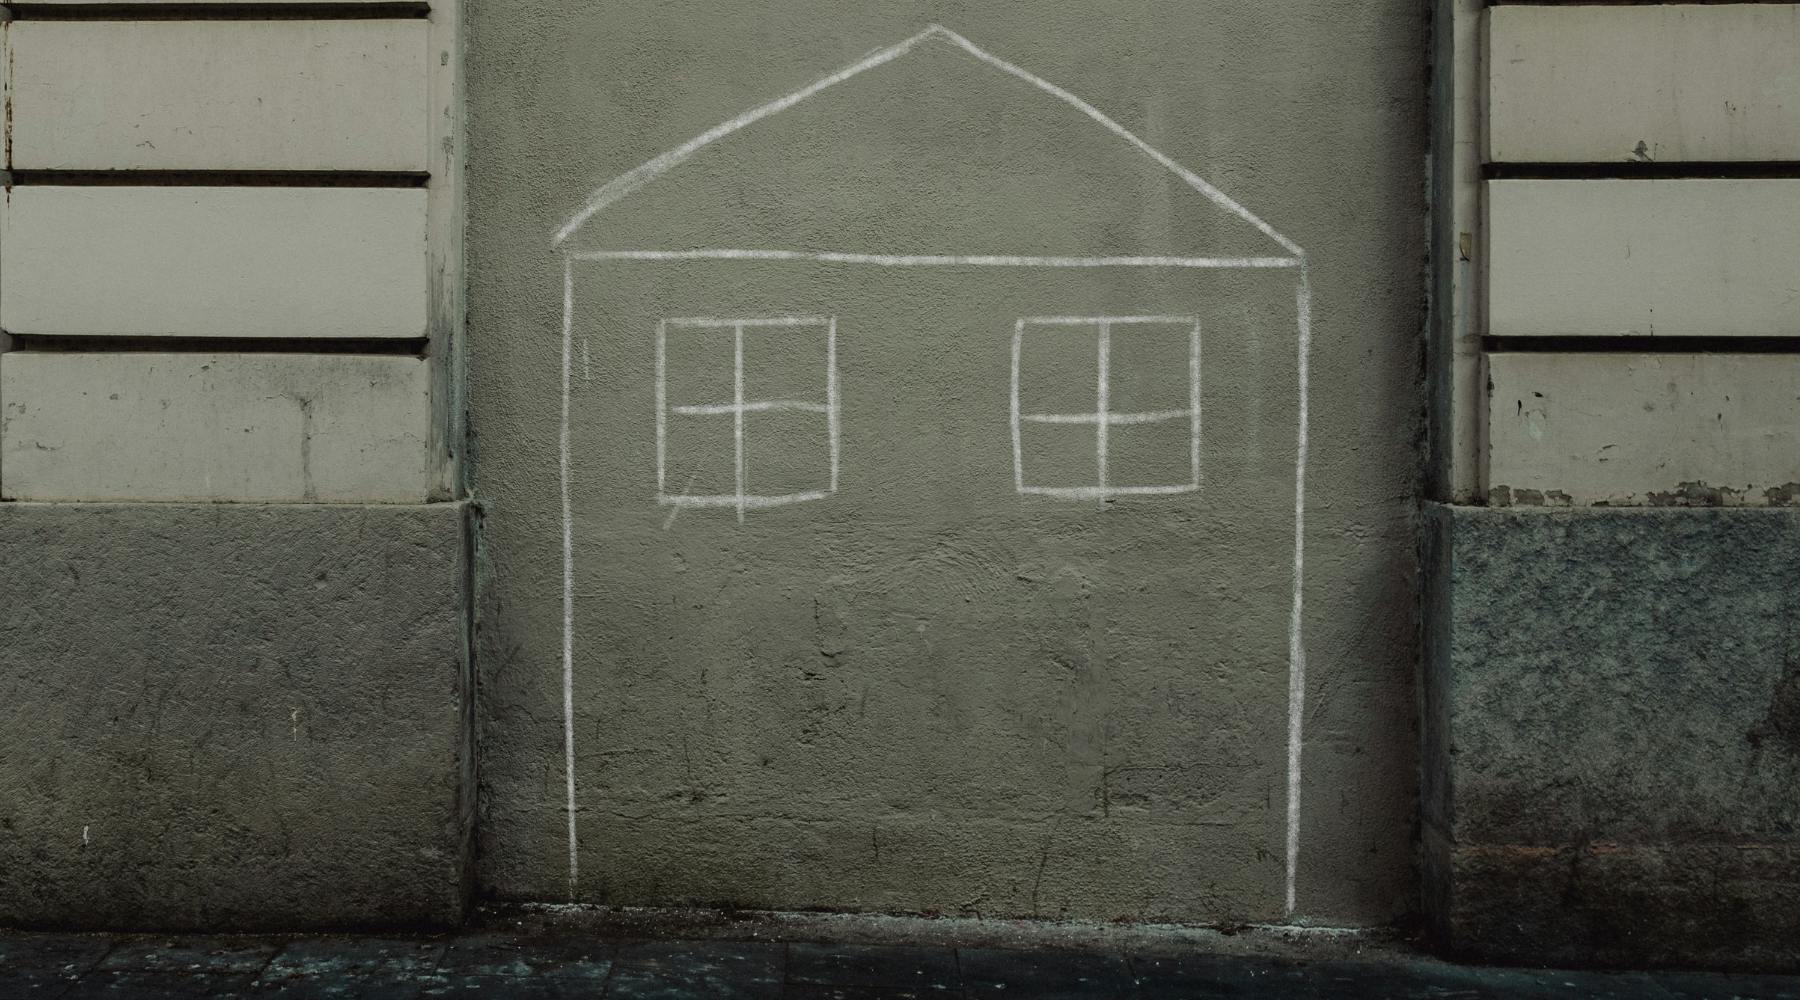 Chalk outline of a house drawn on a concrete wall